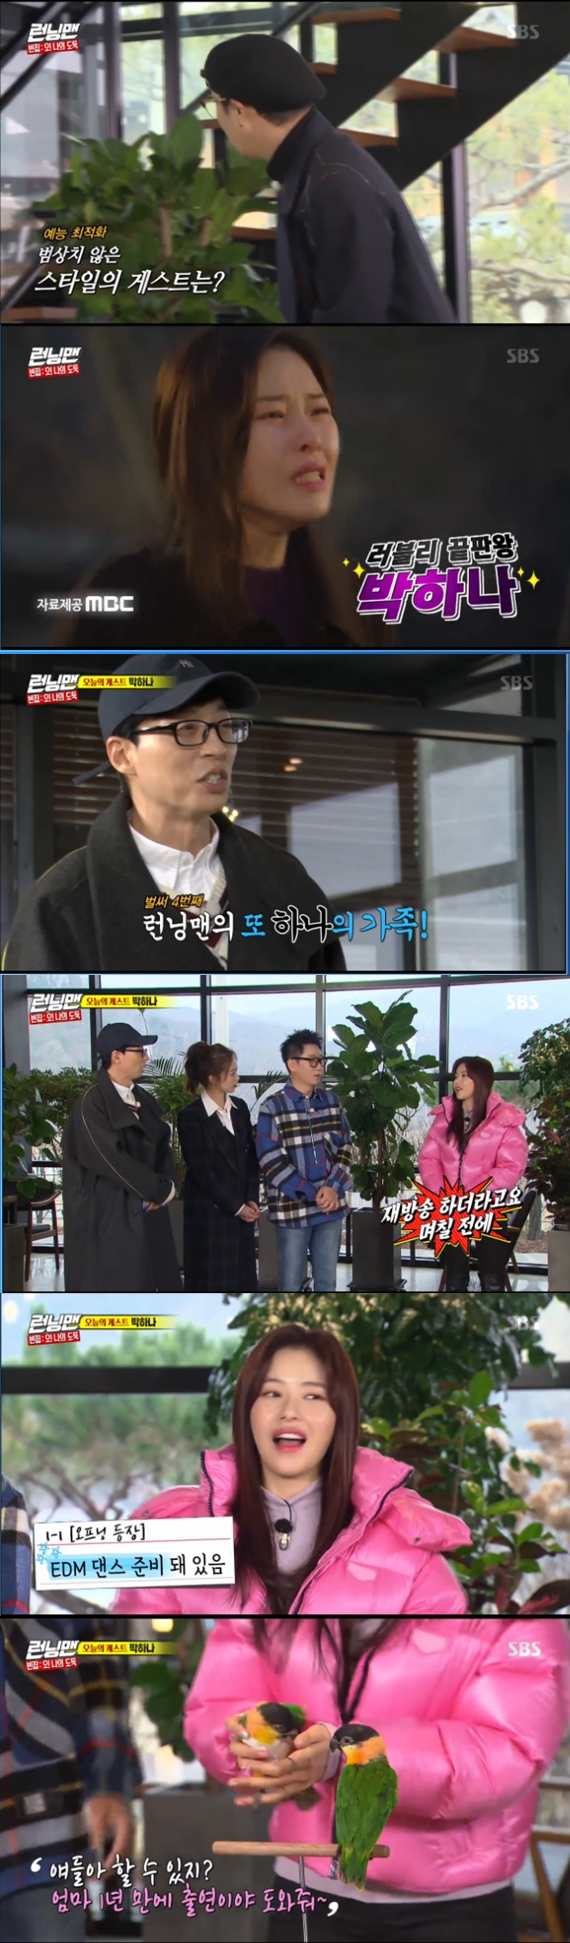 Park Ha-na showed off a special organ.In the SBS entertainment program Running Man broadcasted on the 2nd night, Park Ha-na came out as a guest and joined the members as Empty House: Oh!My thief opened Race.Park Ha-na, who re-starred in Running Man after a year, welcomed the members.Yoo Jae-Suk was surprised to see the script introducing Park Ha-na.Yoo Jae-Suk said, It is drawn in blue lines in the script. In three seconds, Park Ha-na predicted EDM dance.I was embarrassed to be alone and brought Friend, Park Ha-na said.The Friends that Park Ha-na brought in were two Parrots she raised.Lee Kwang-soo laughed when Park Ha-na said that he was playing EDM dance with Parrot, saying, Is this something that should come out in the world?